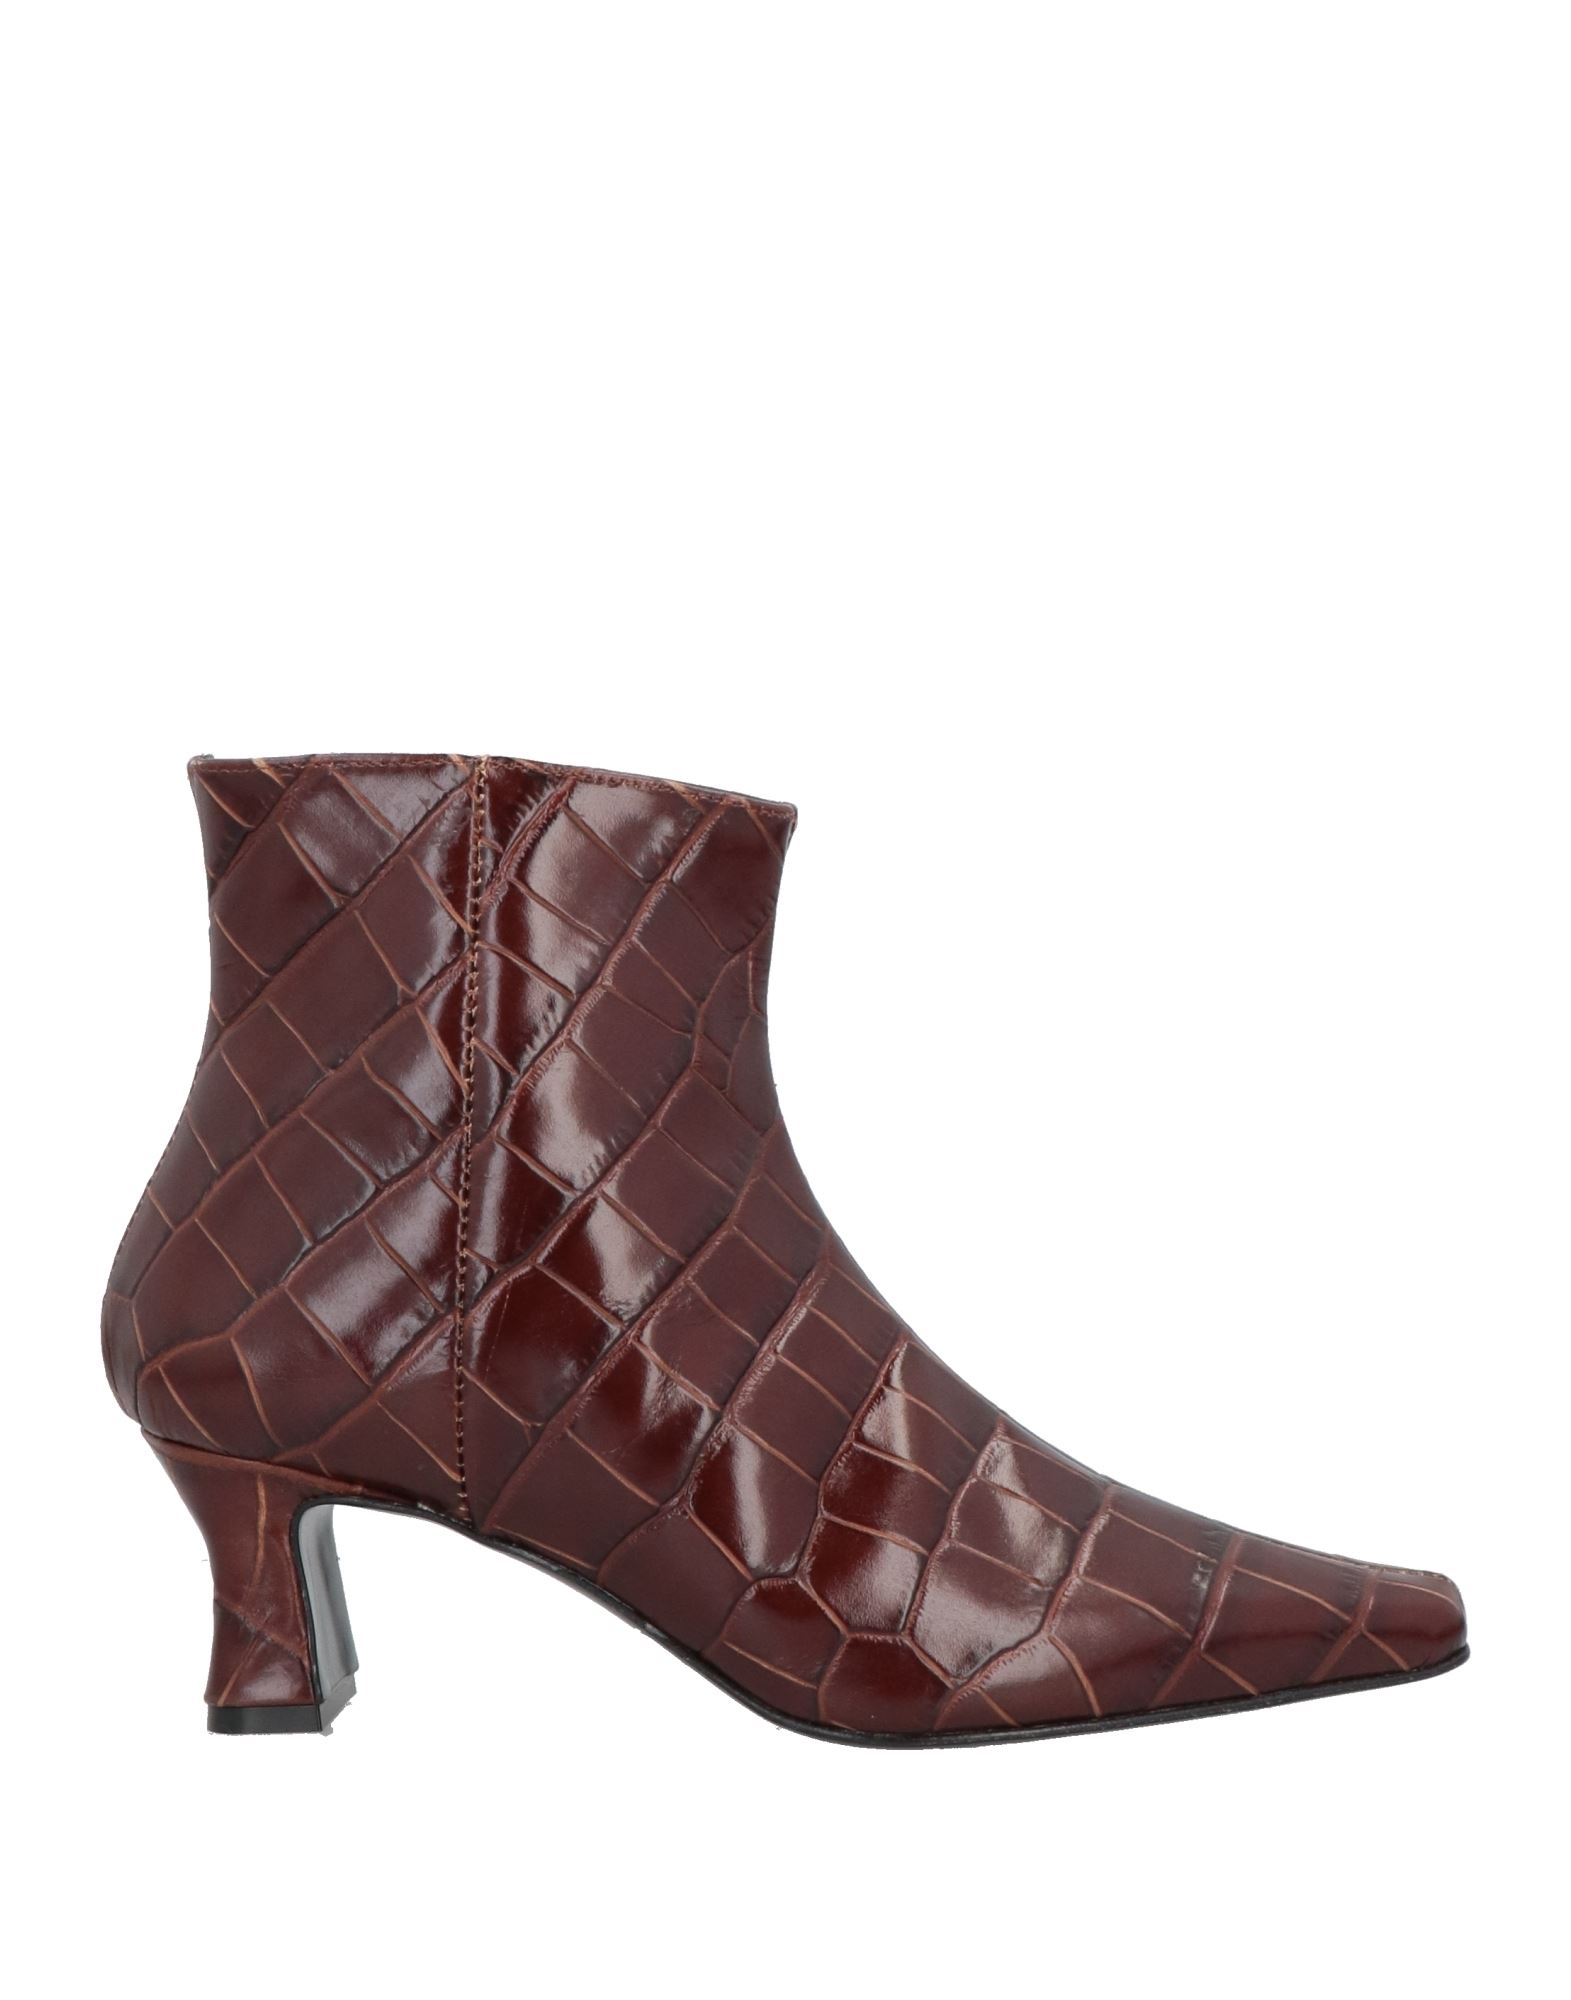 Ncub Ankle Boots In Brown